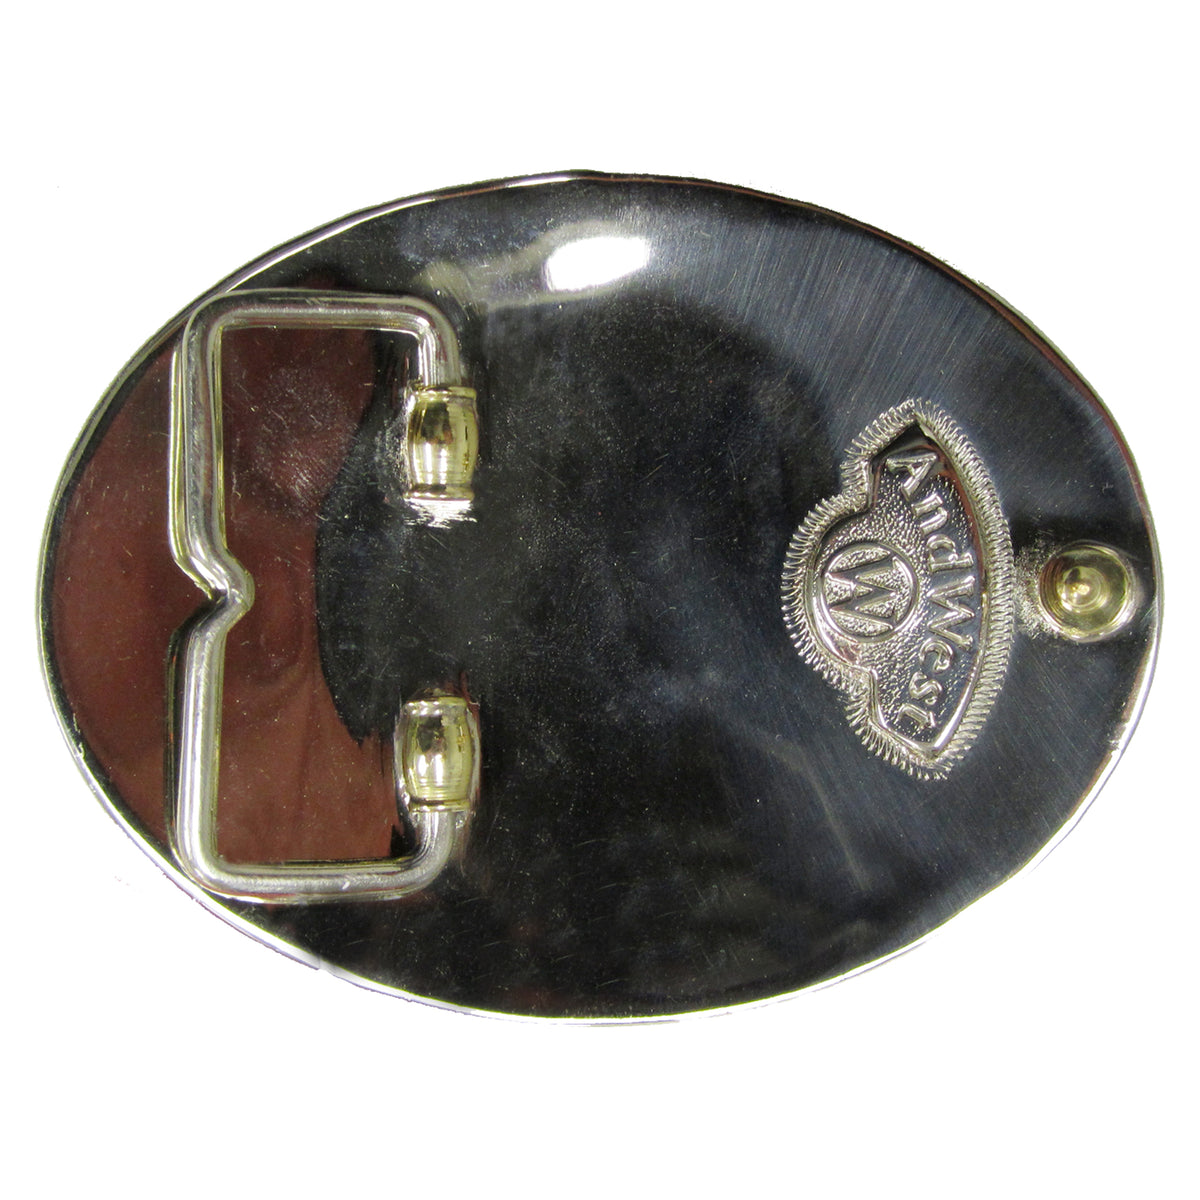 “Saguaro” Oval with Navajo Feathers Buckle